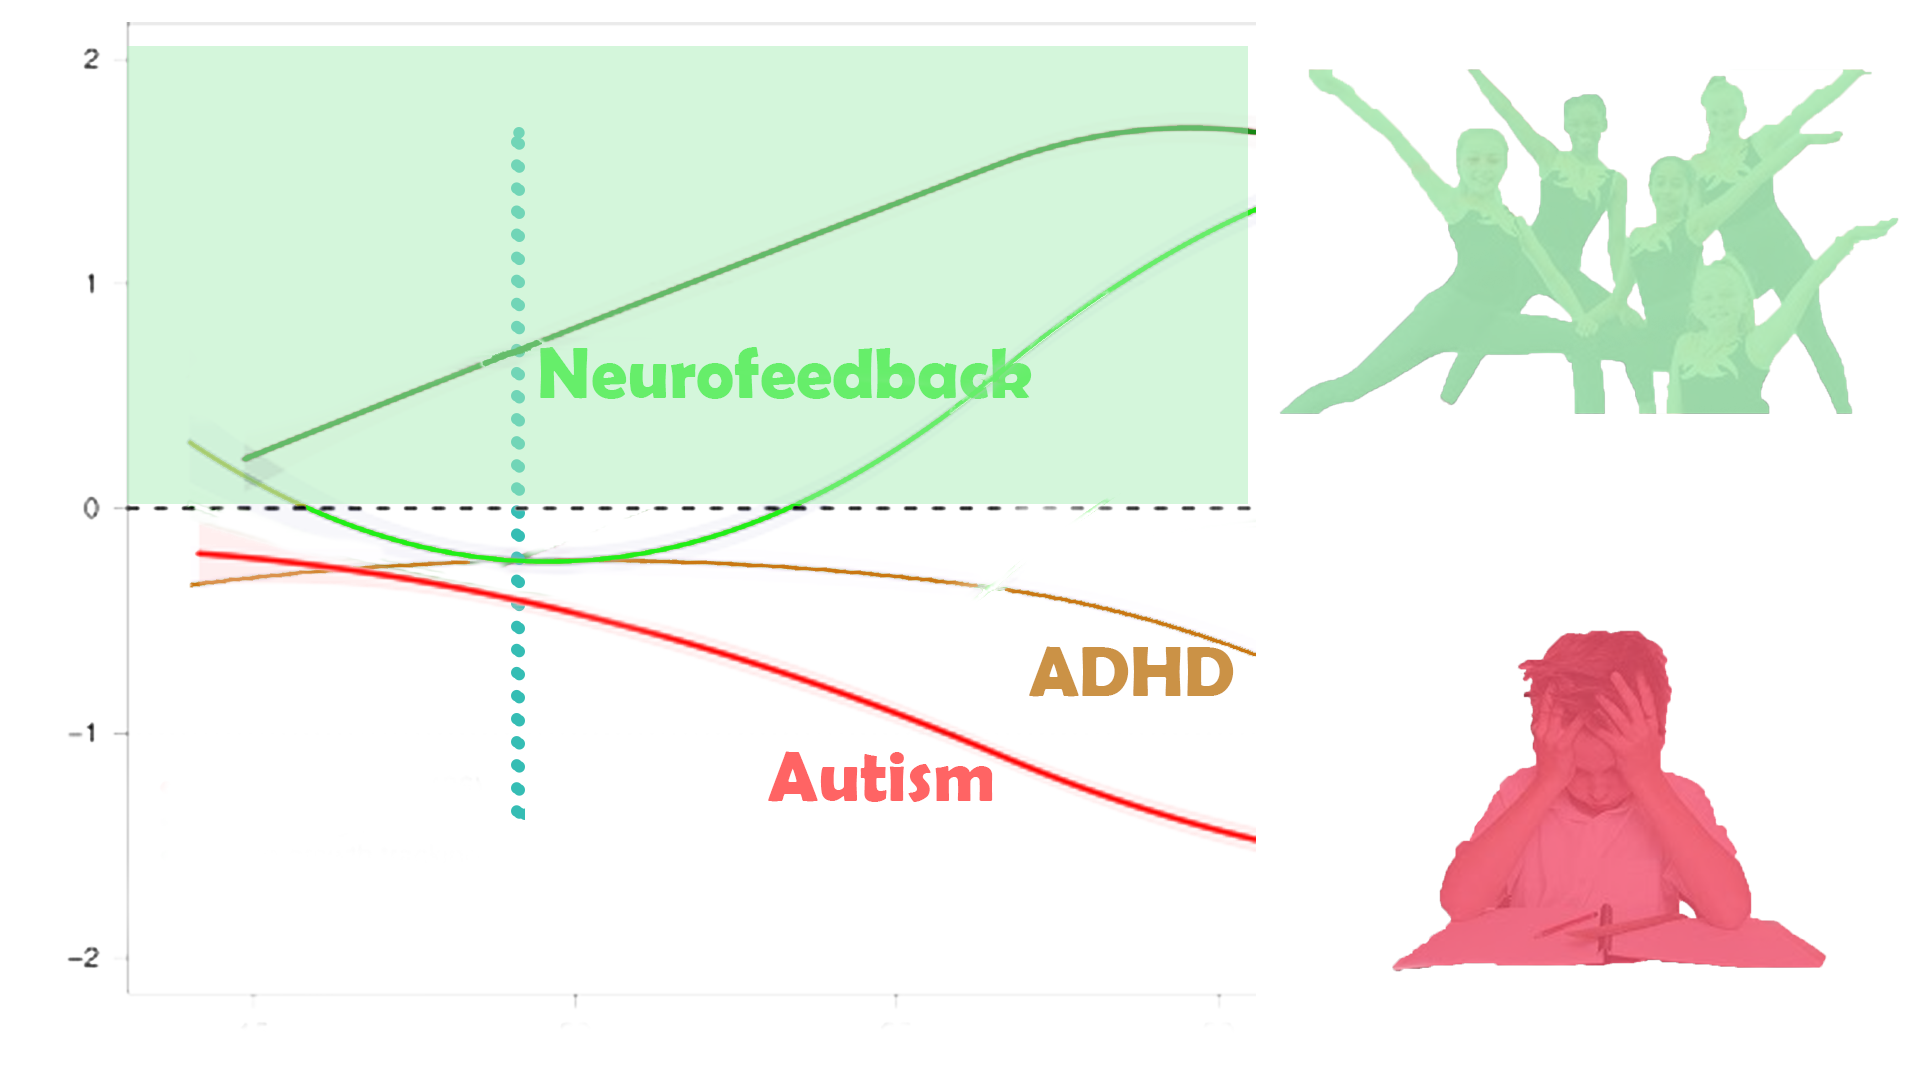 Neurofeedback can positively impact trajectories of children and young adults